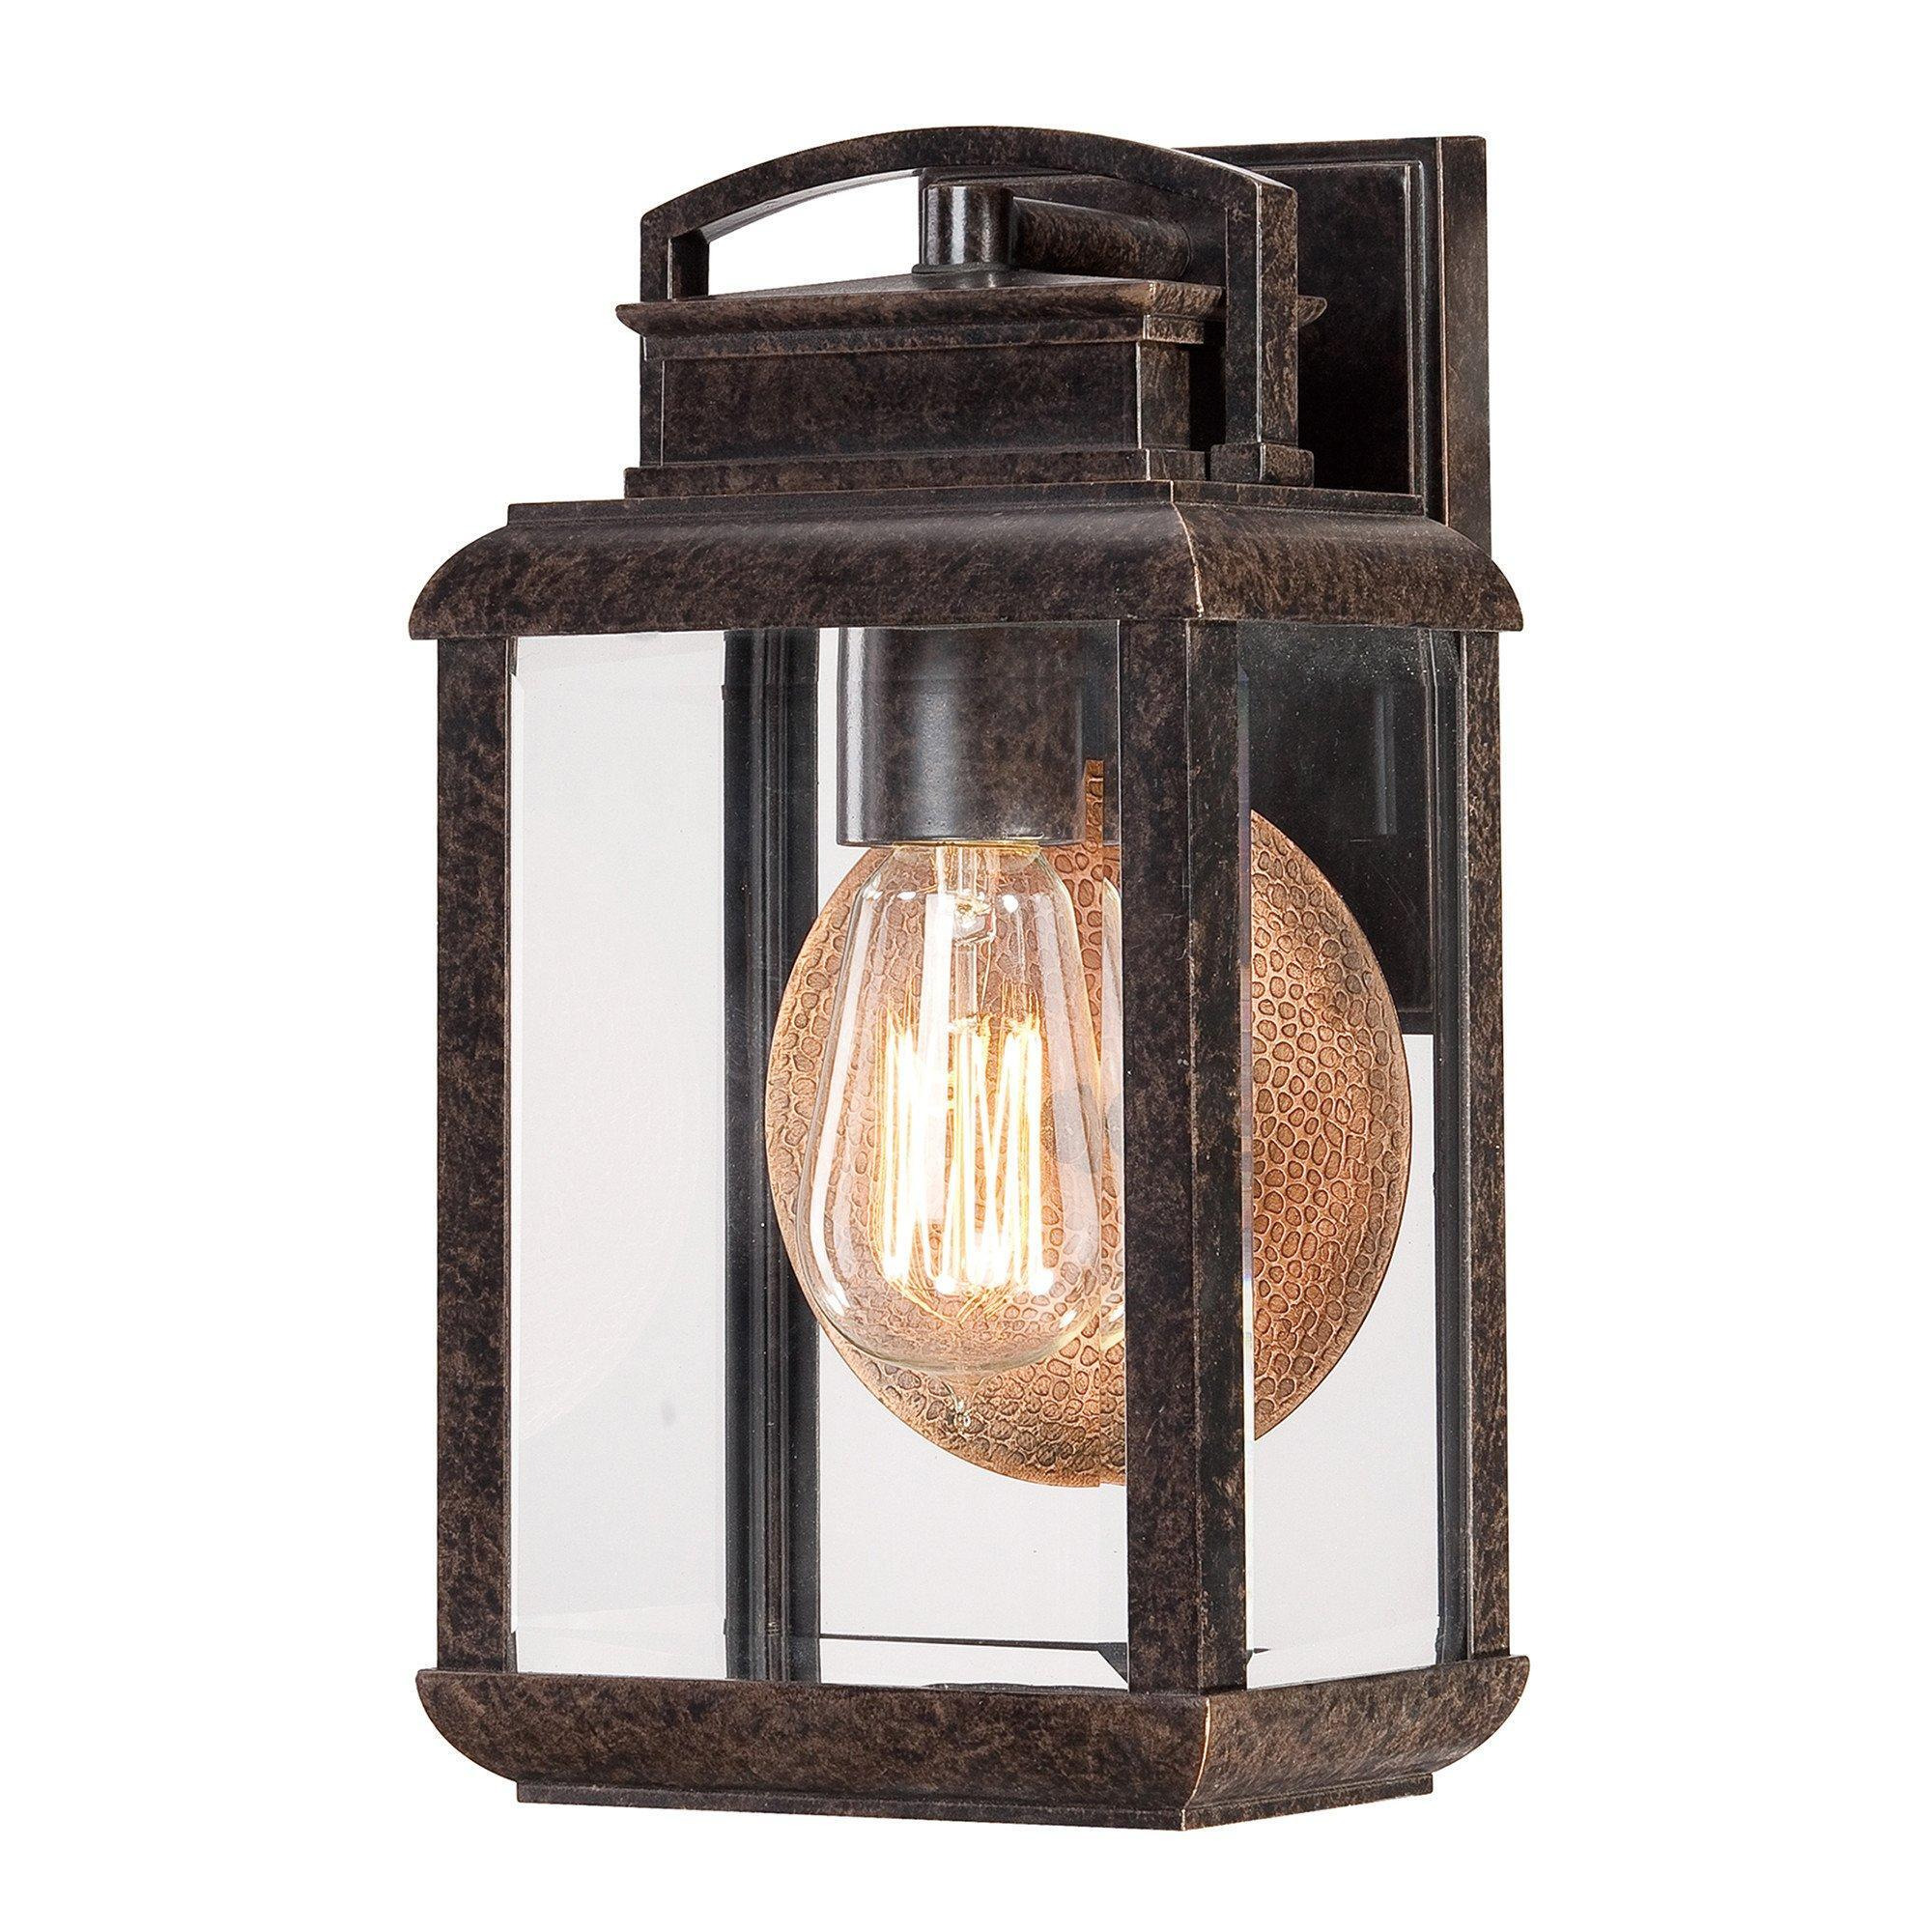 Byron 1 Light Outdoor Small Wall Lantern Light Imperial Bronze IP44 E27 - image 1